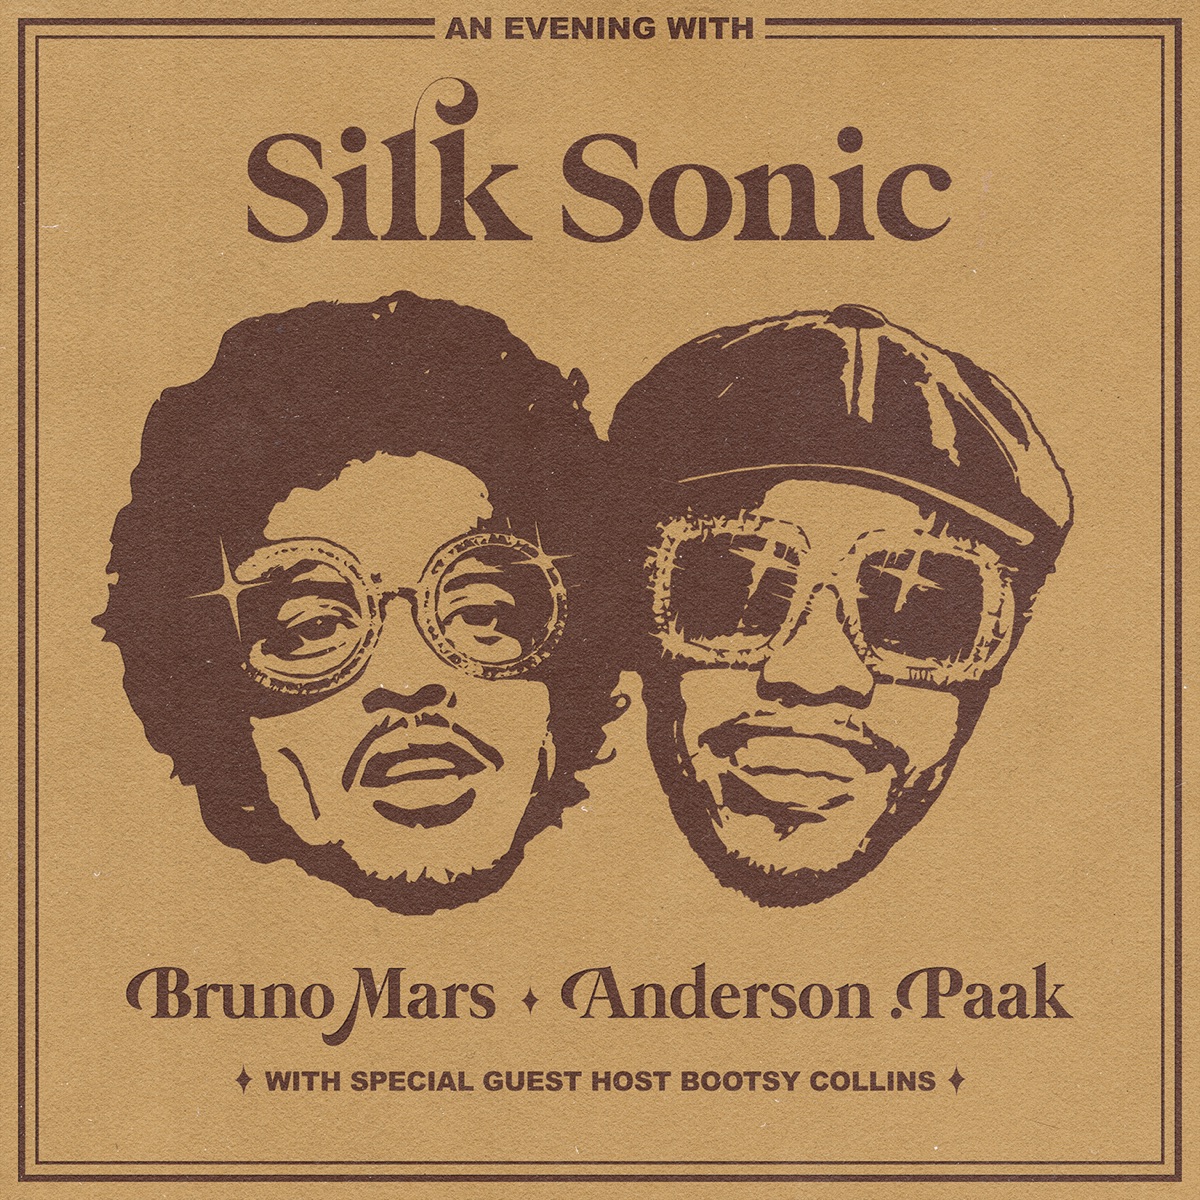 Cover for『Bruno Mars, Anderson .Paak, Silk Sonic - Leave the Door Open』from the release『An Evening With Silk Sonic 』